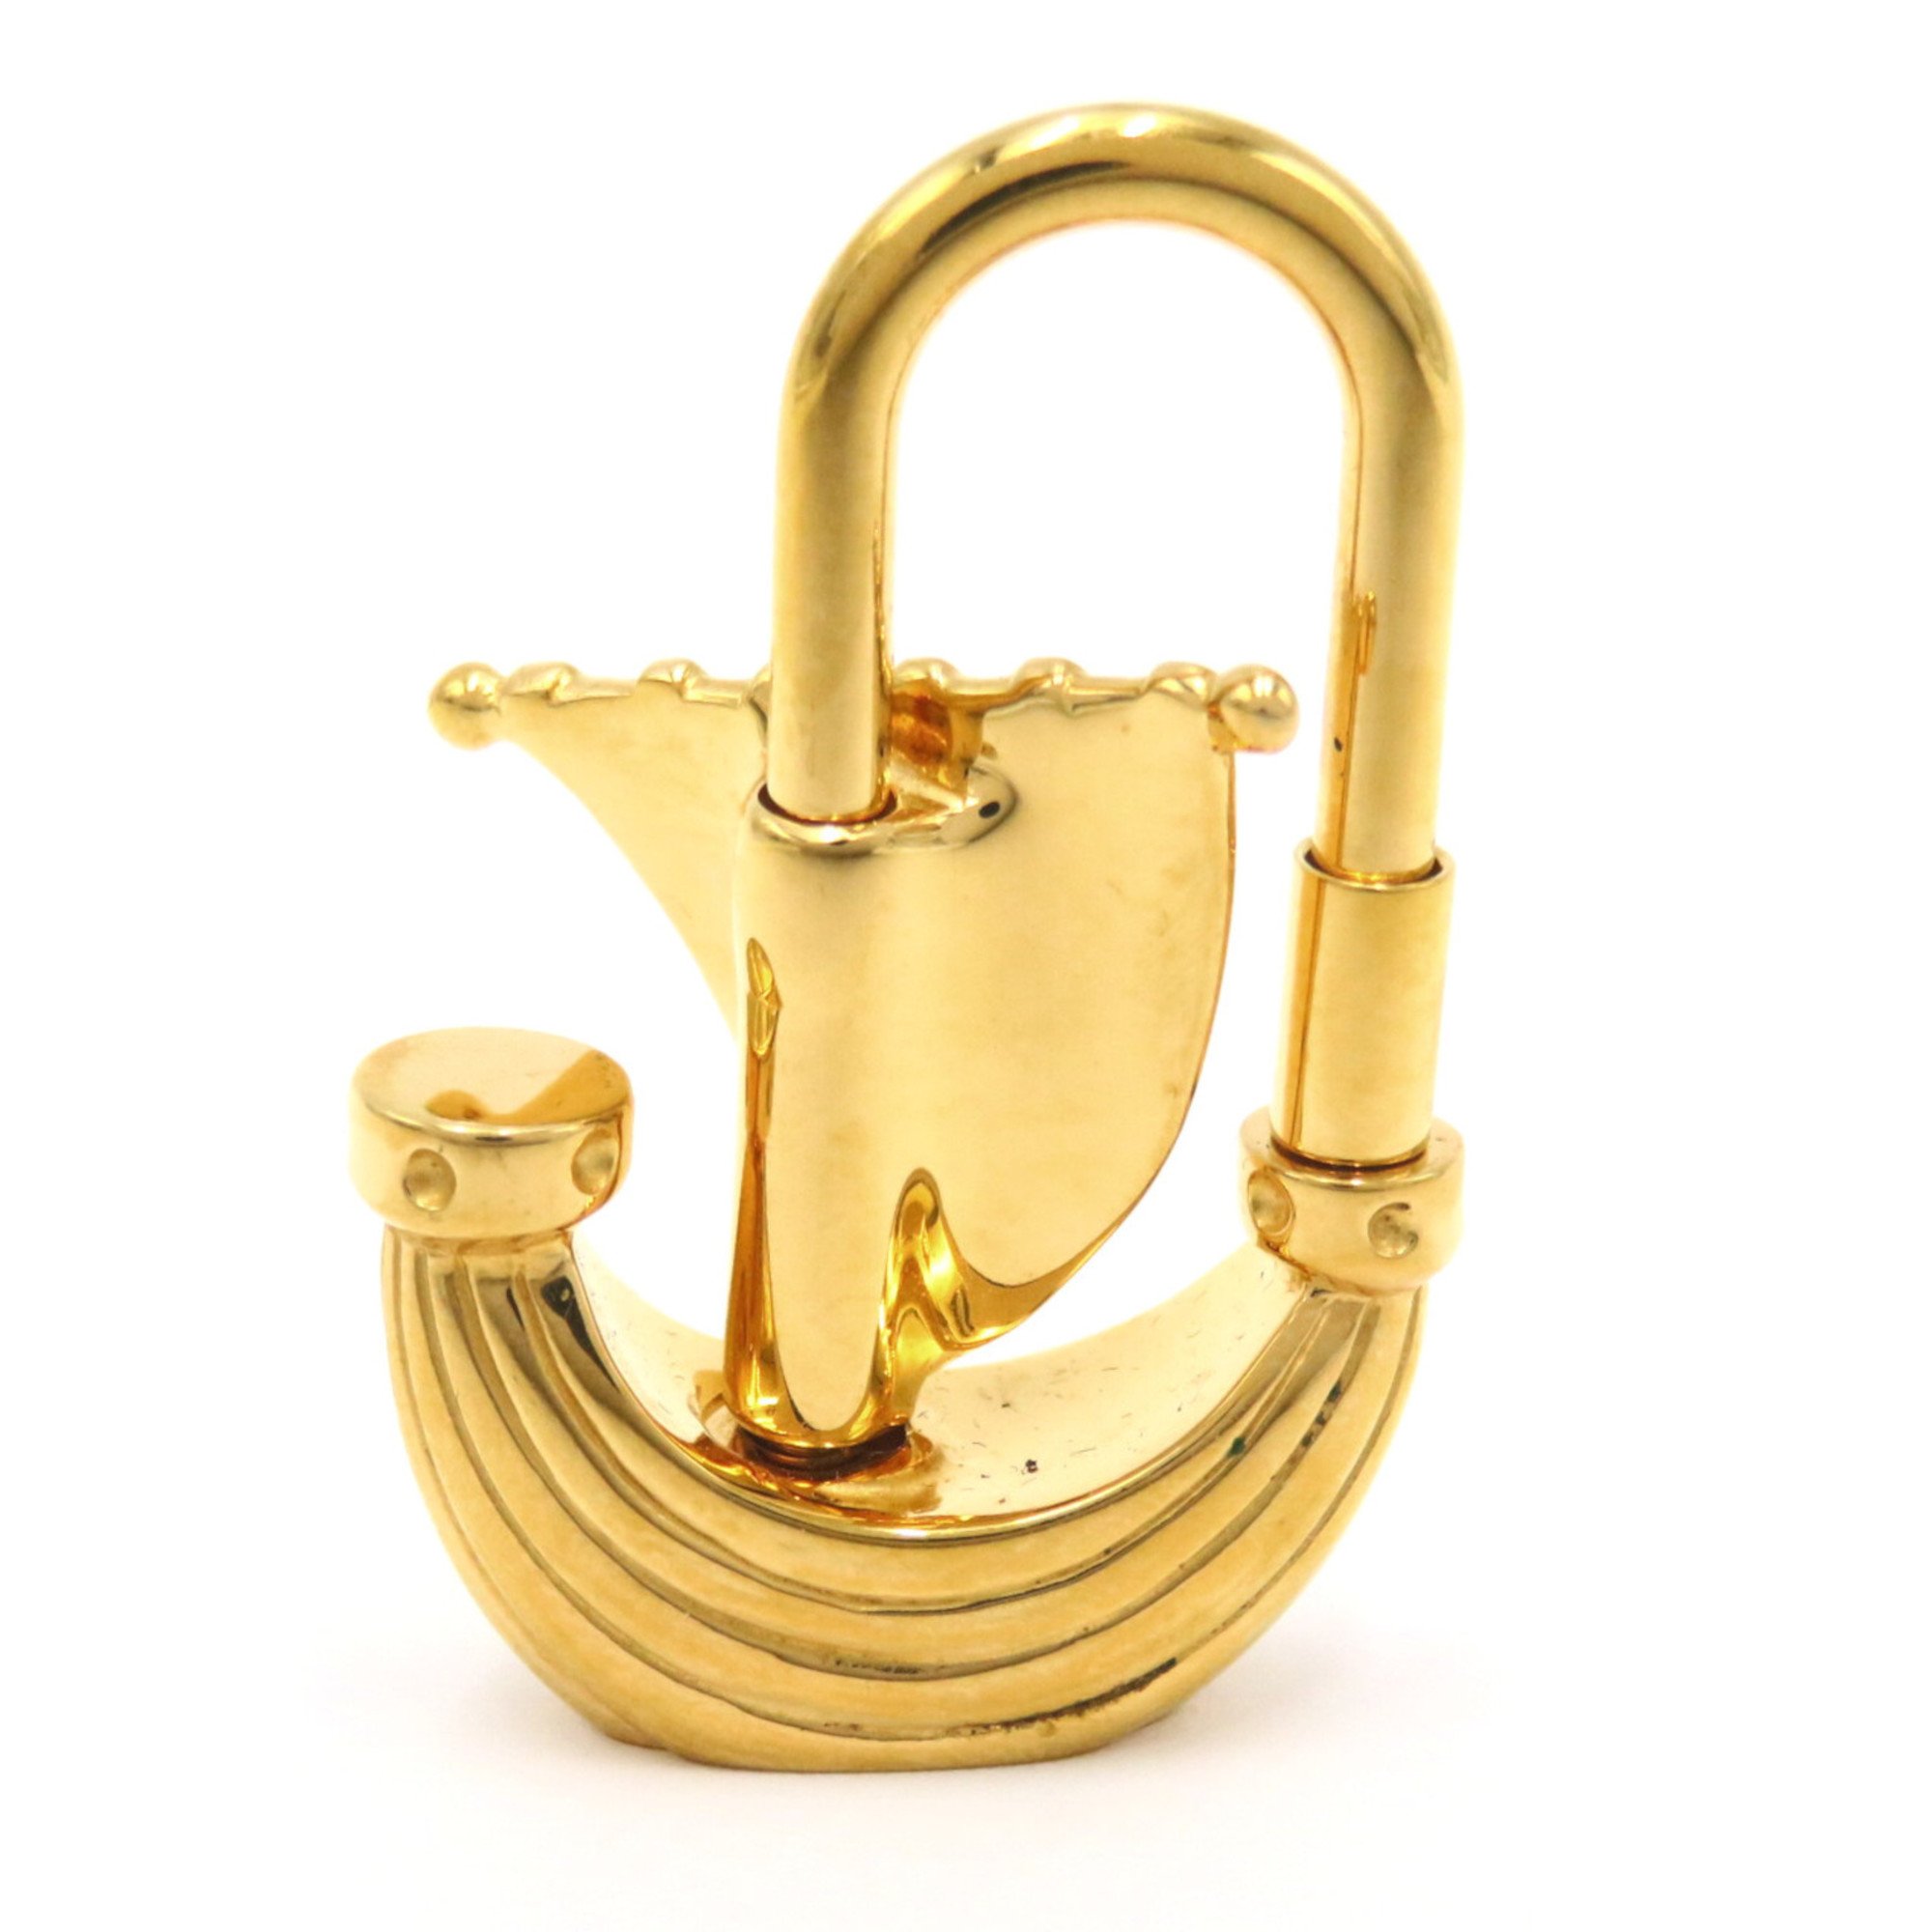 HERMES cadena yacht Gold Gold Plated